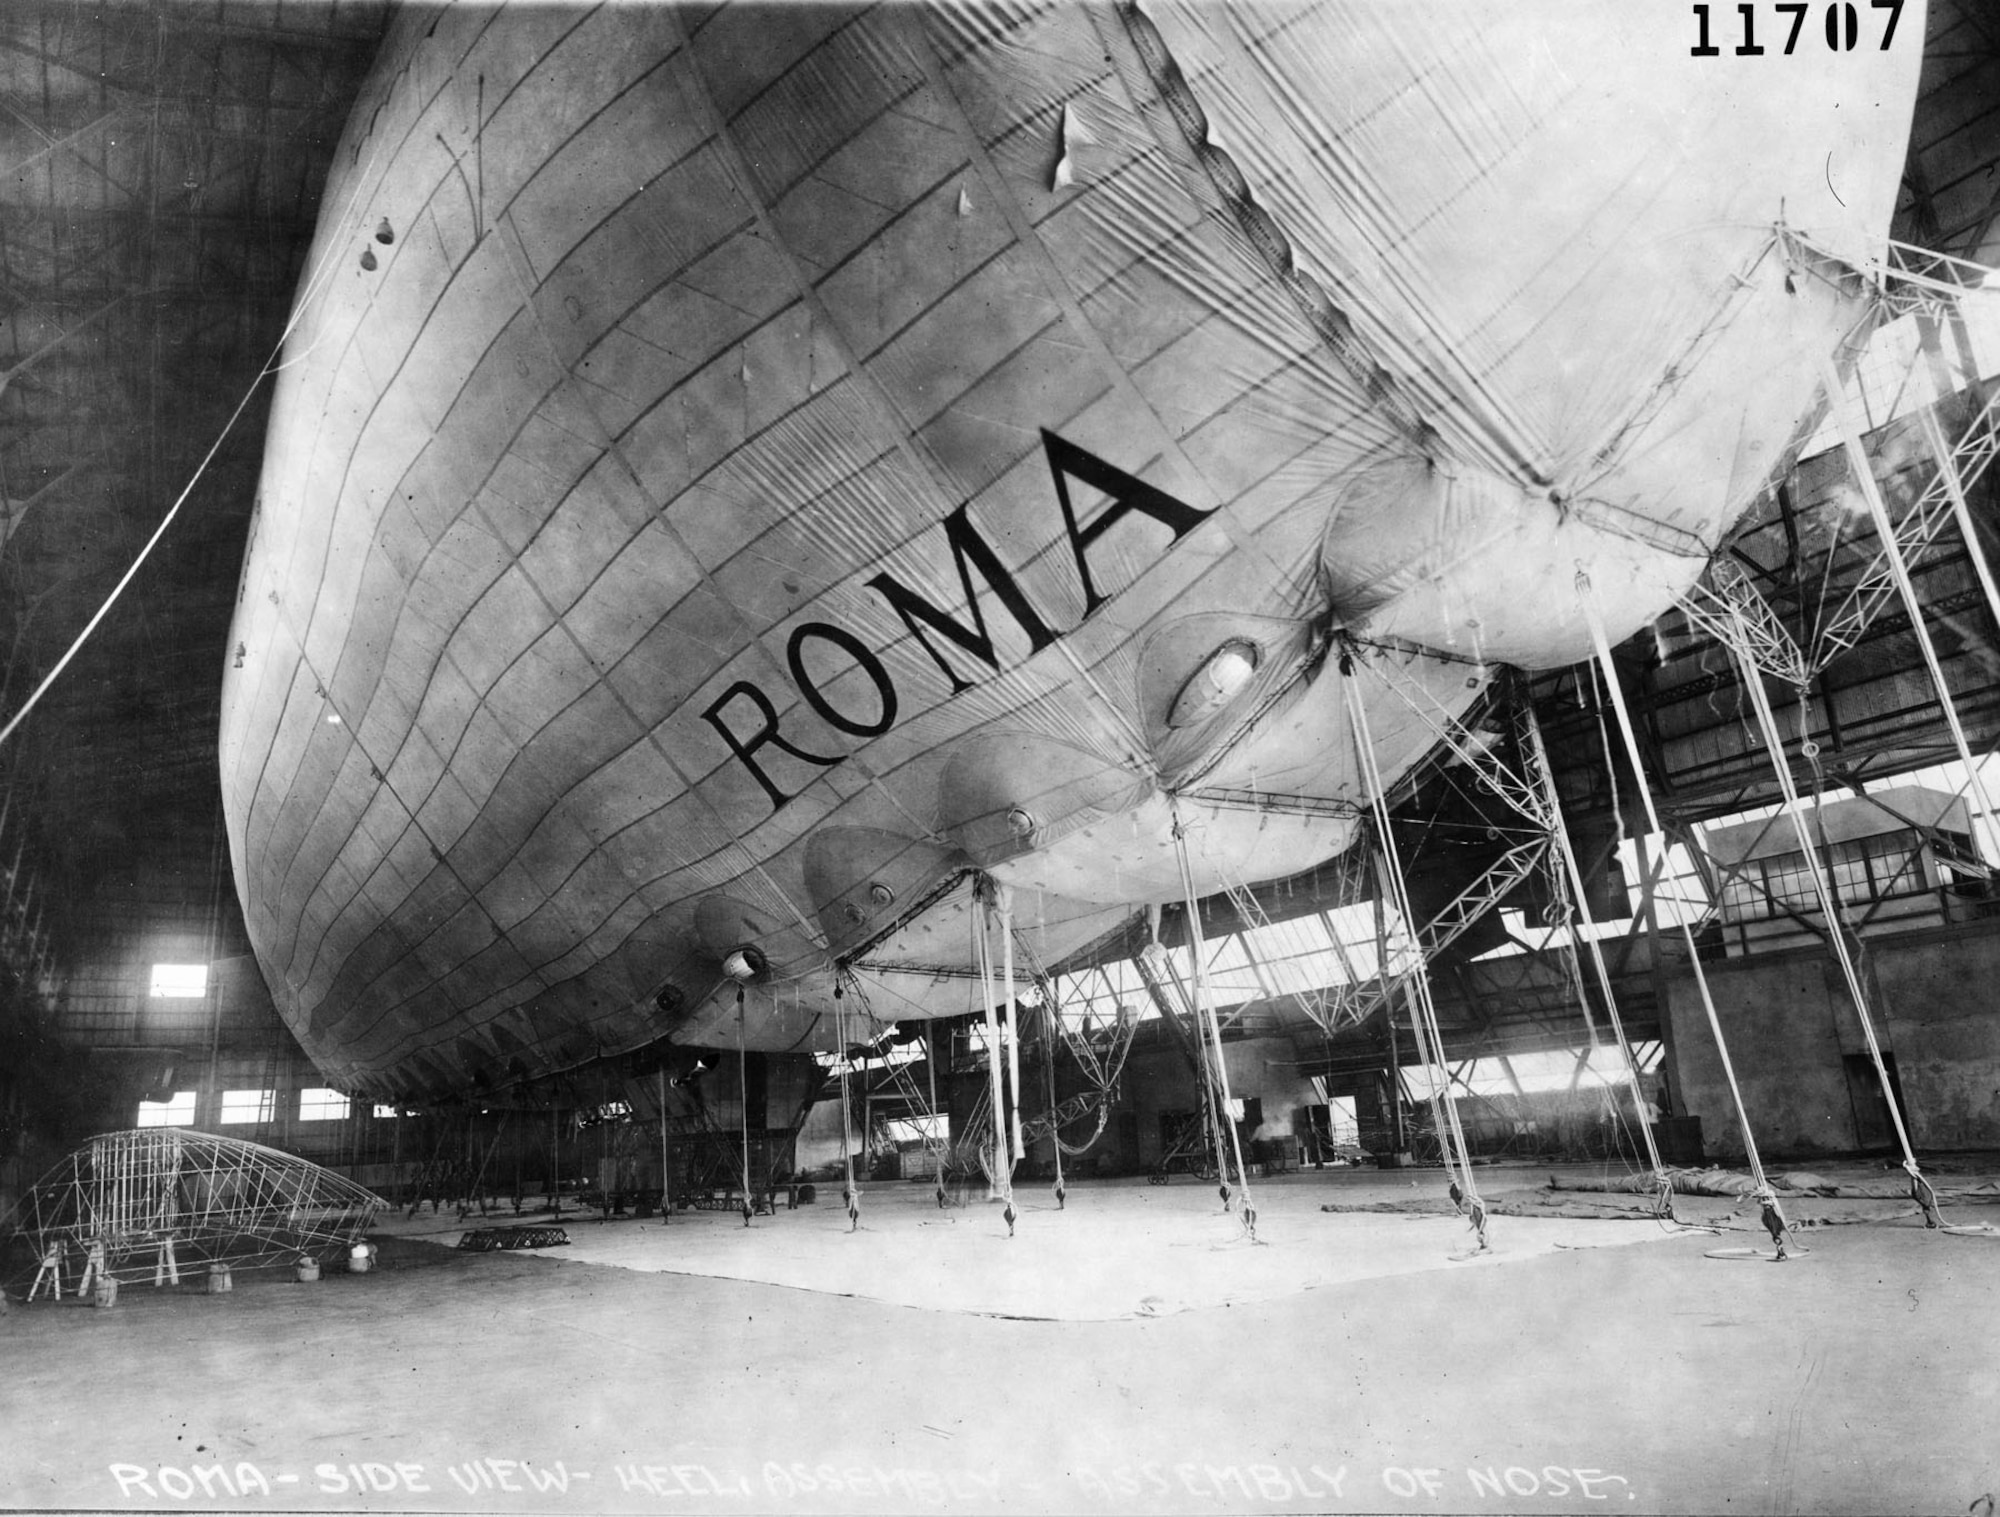 A semi-rigid airship, the Roma used hydrogen for lift, and a metal keel supported the bag. This photograph shows the metal keel being assembled. Afterward, the metal framework was covered with cloth, giving the Roma its characteristic fin along the bottom. (U.S. Air Force photo)